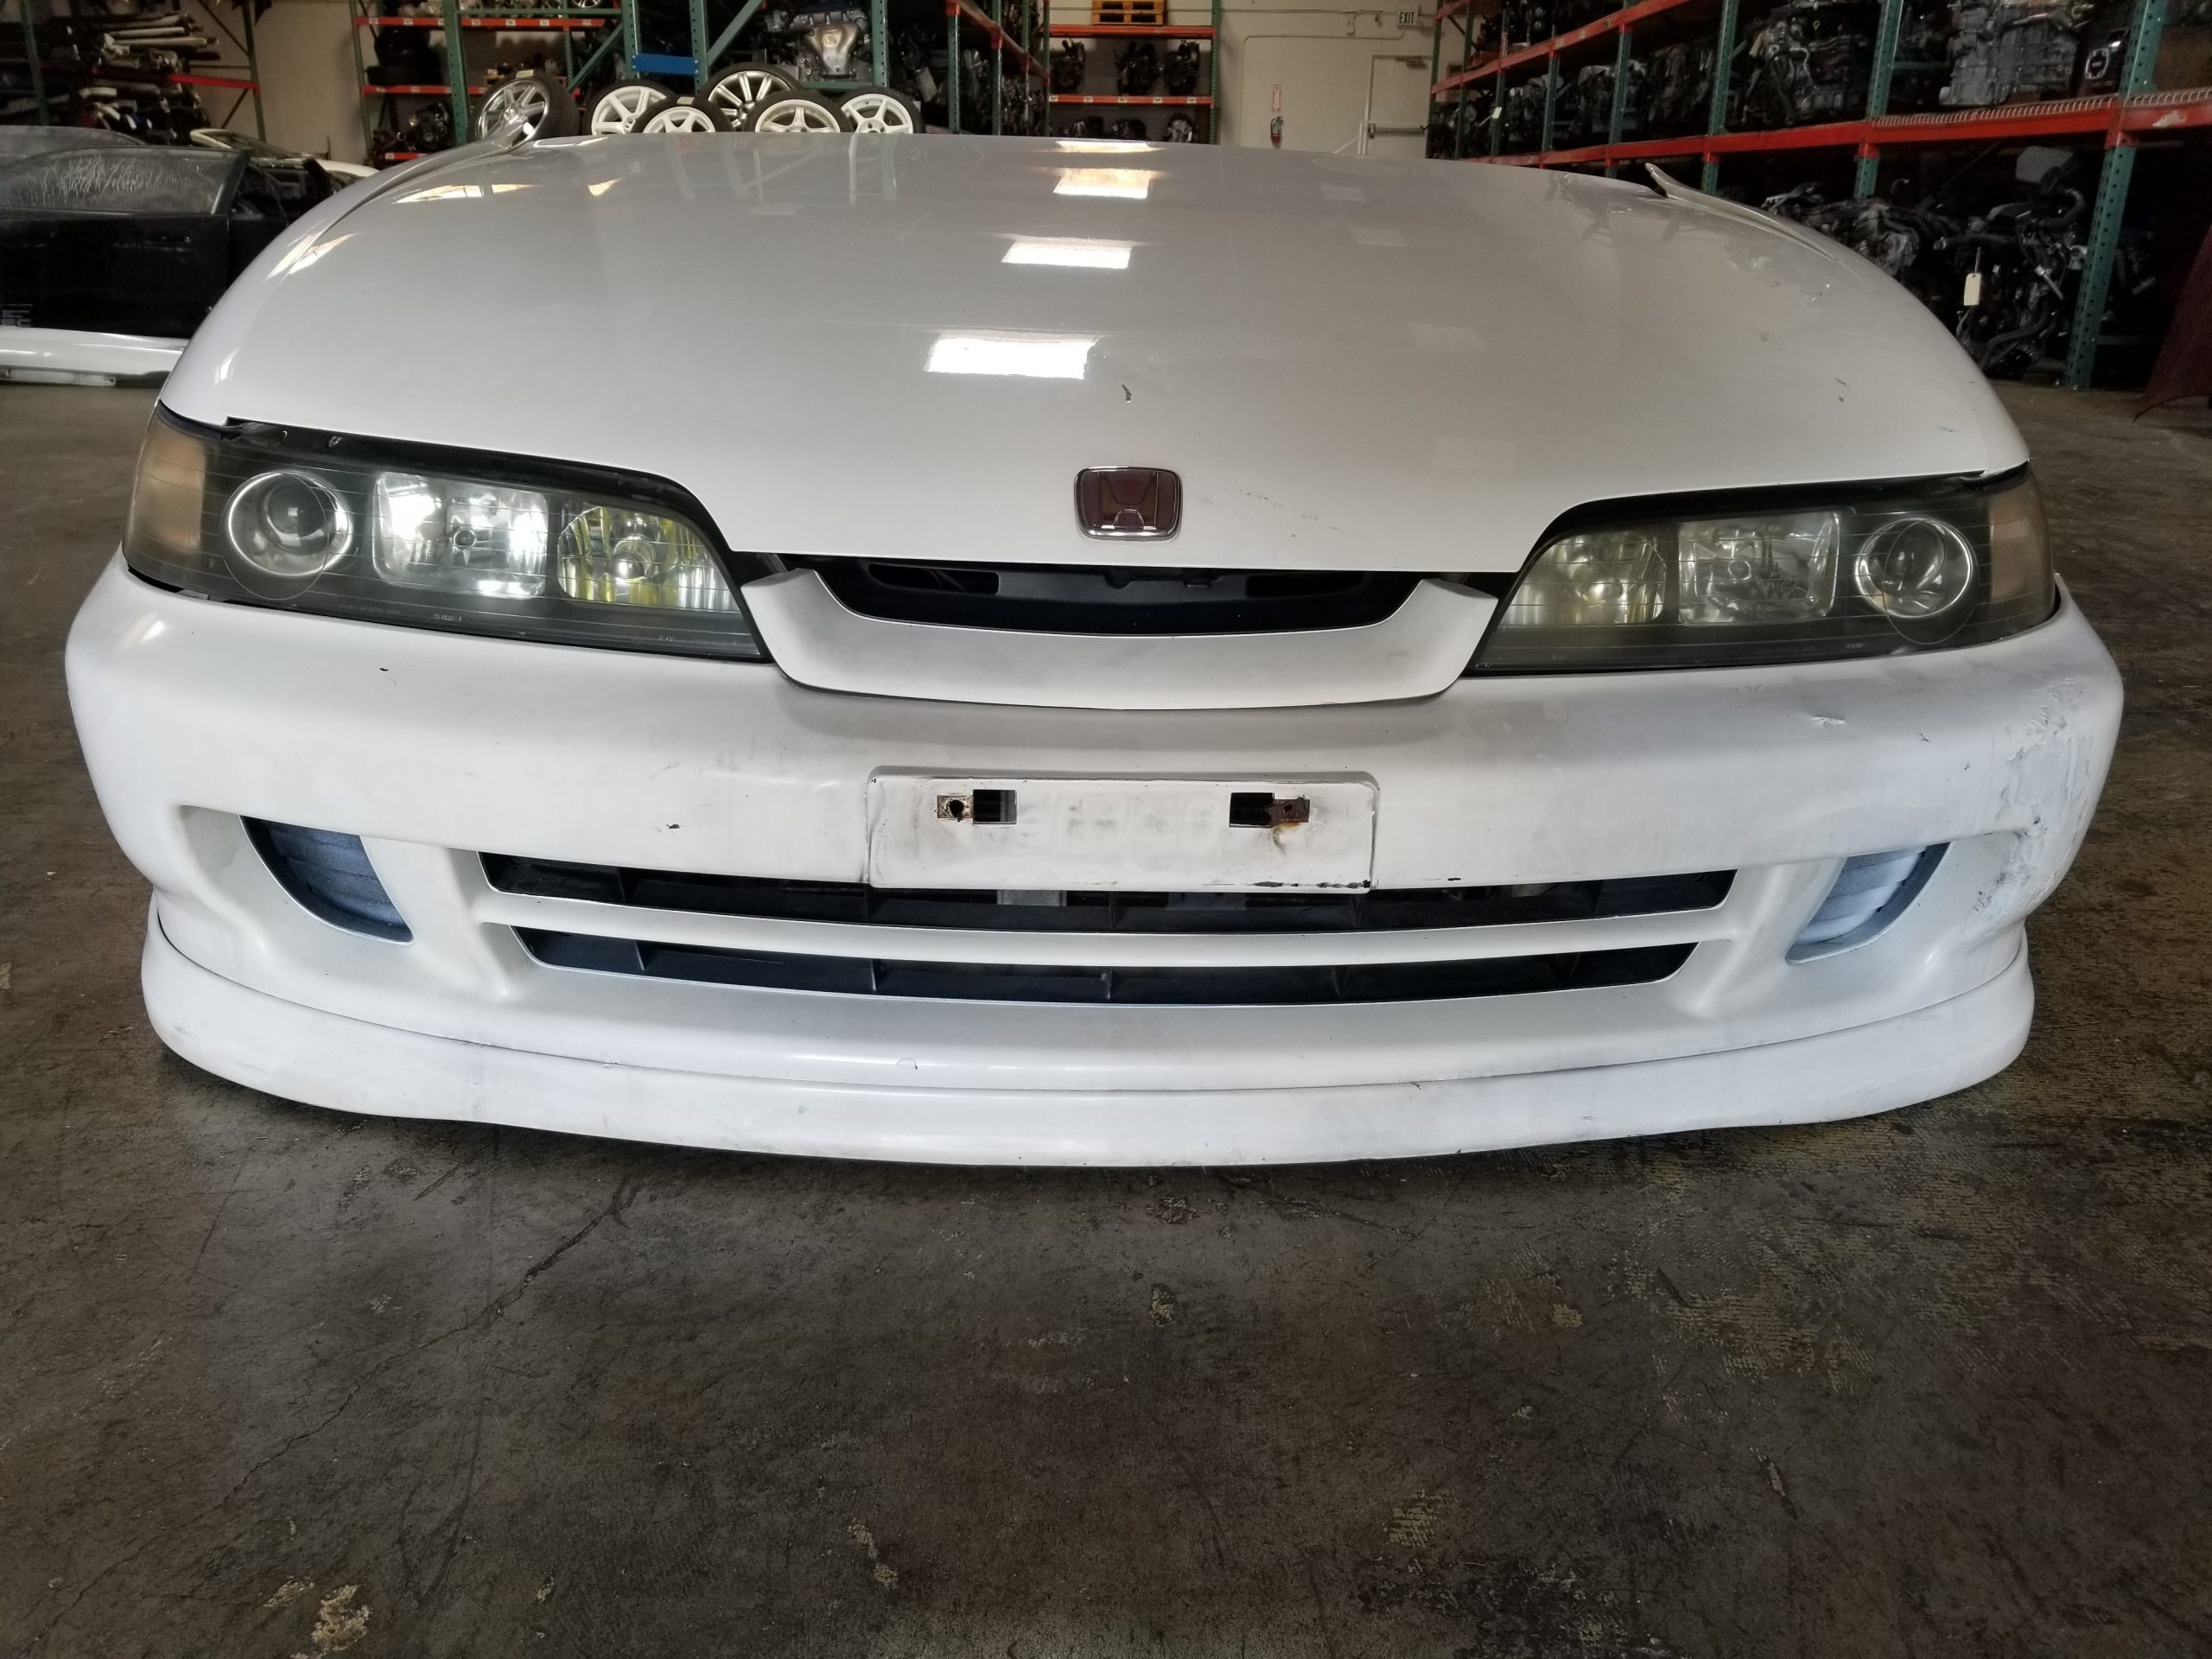 Dc2 1998 2001 Acura Integra Jdm Dc2 Itr Front Nose Cut Type R Conversion Wh...